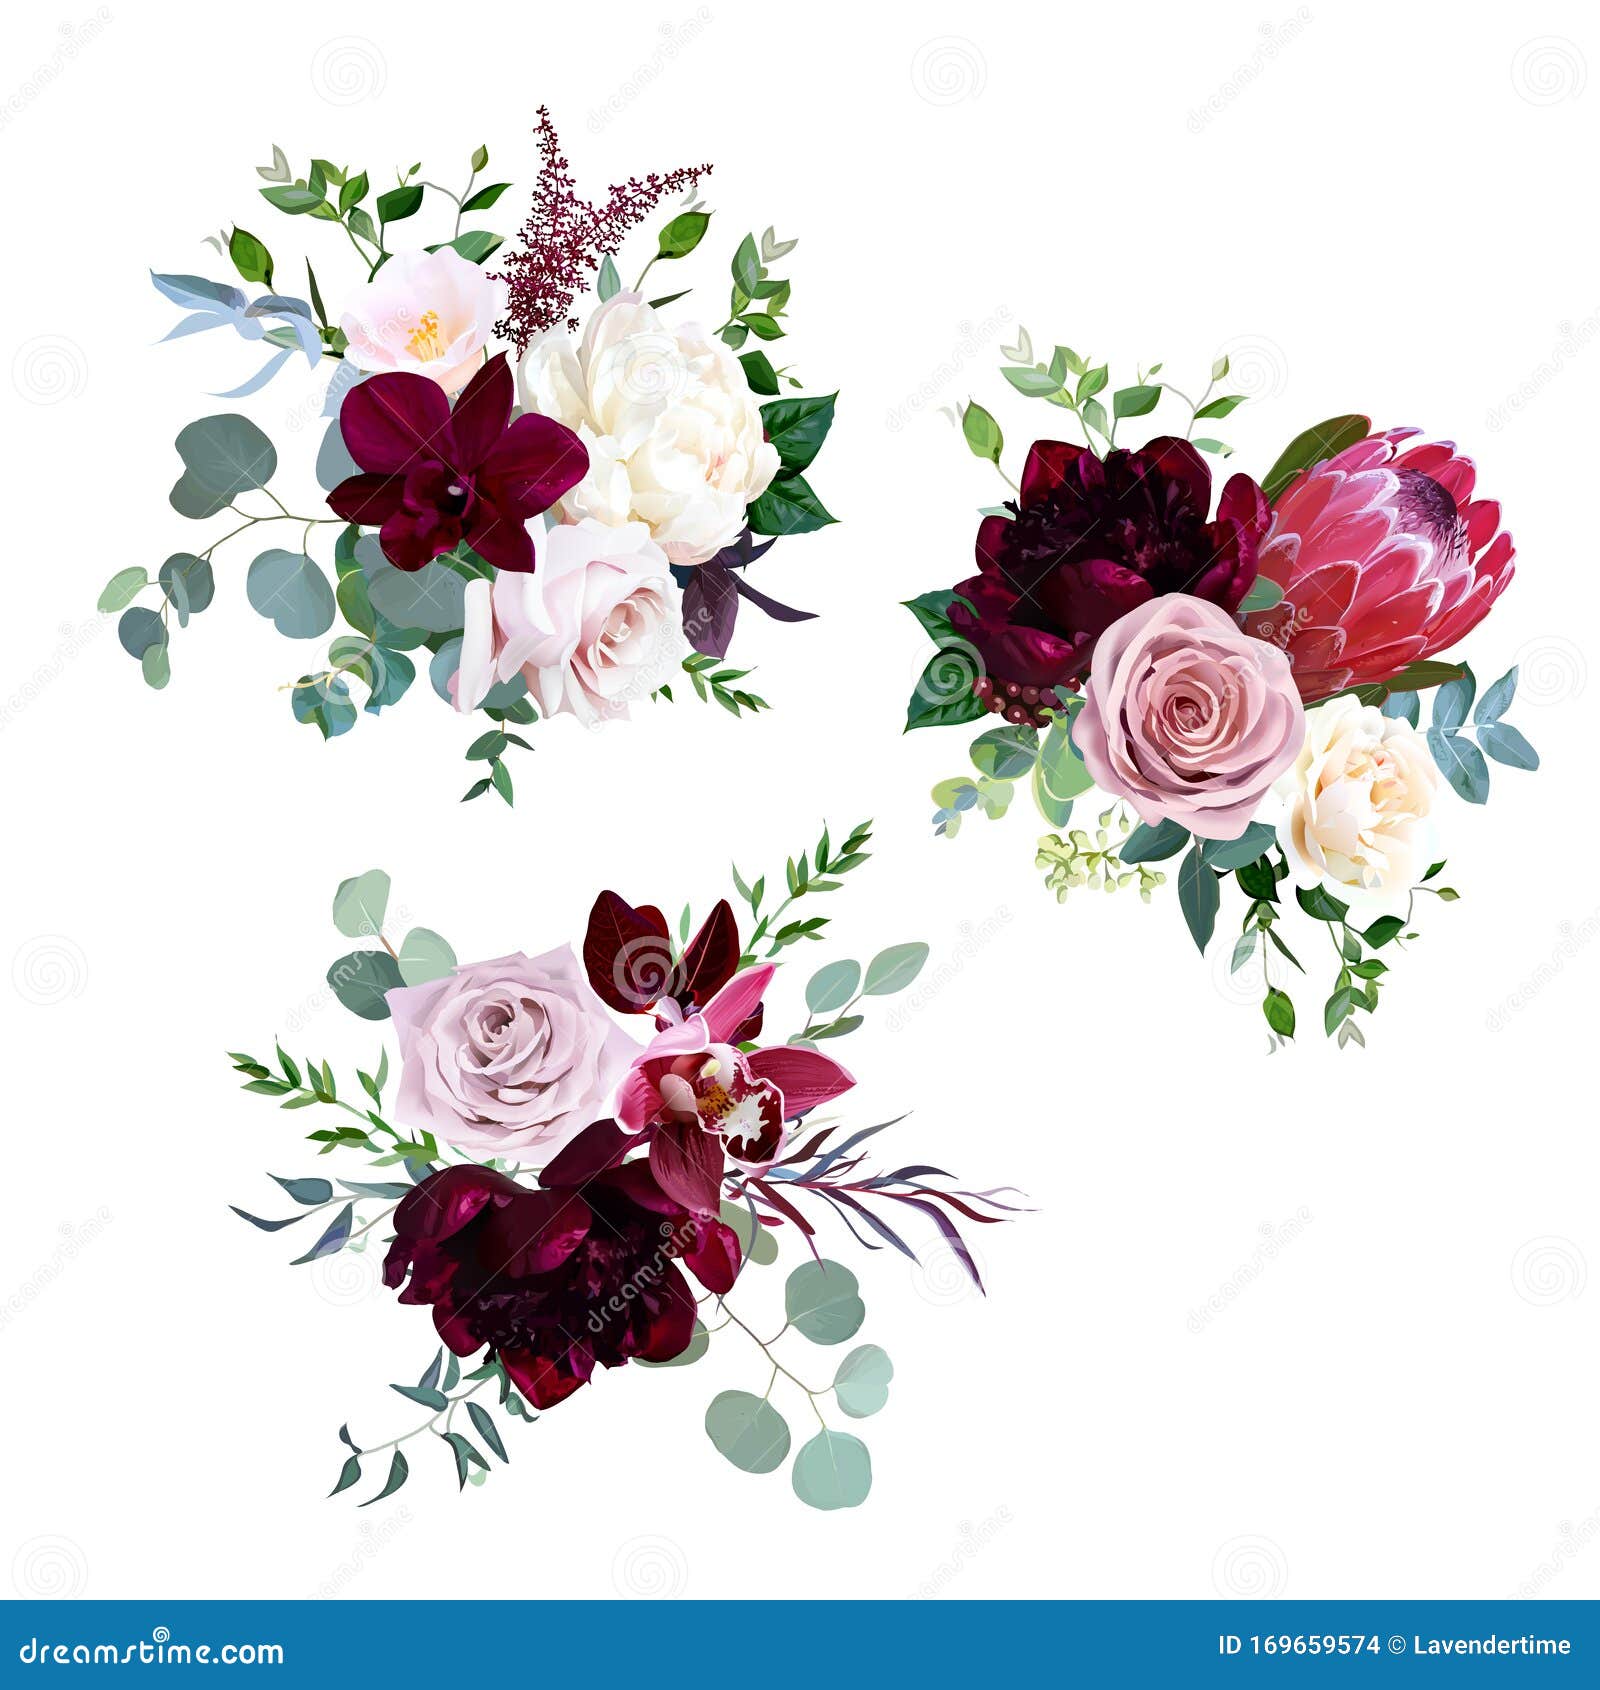 dusty pink, mauve and creamy rose, magenta protea, burgundy and white peony